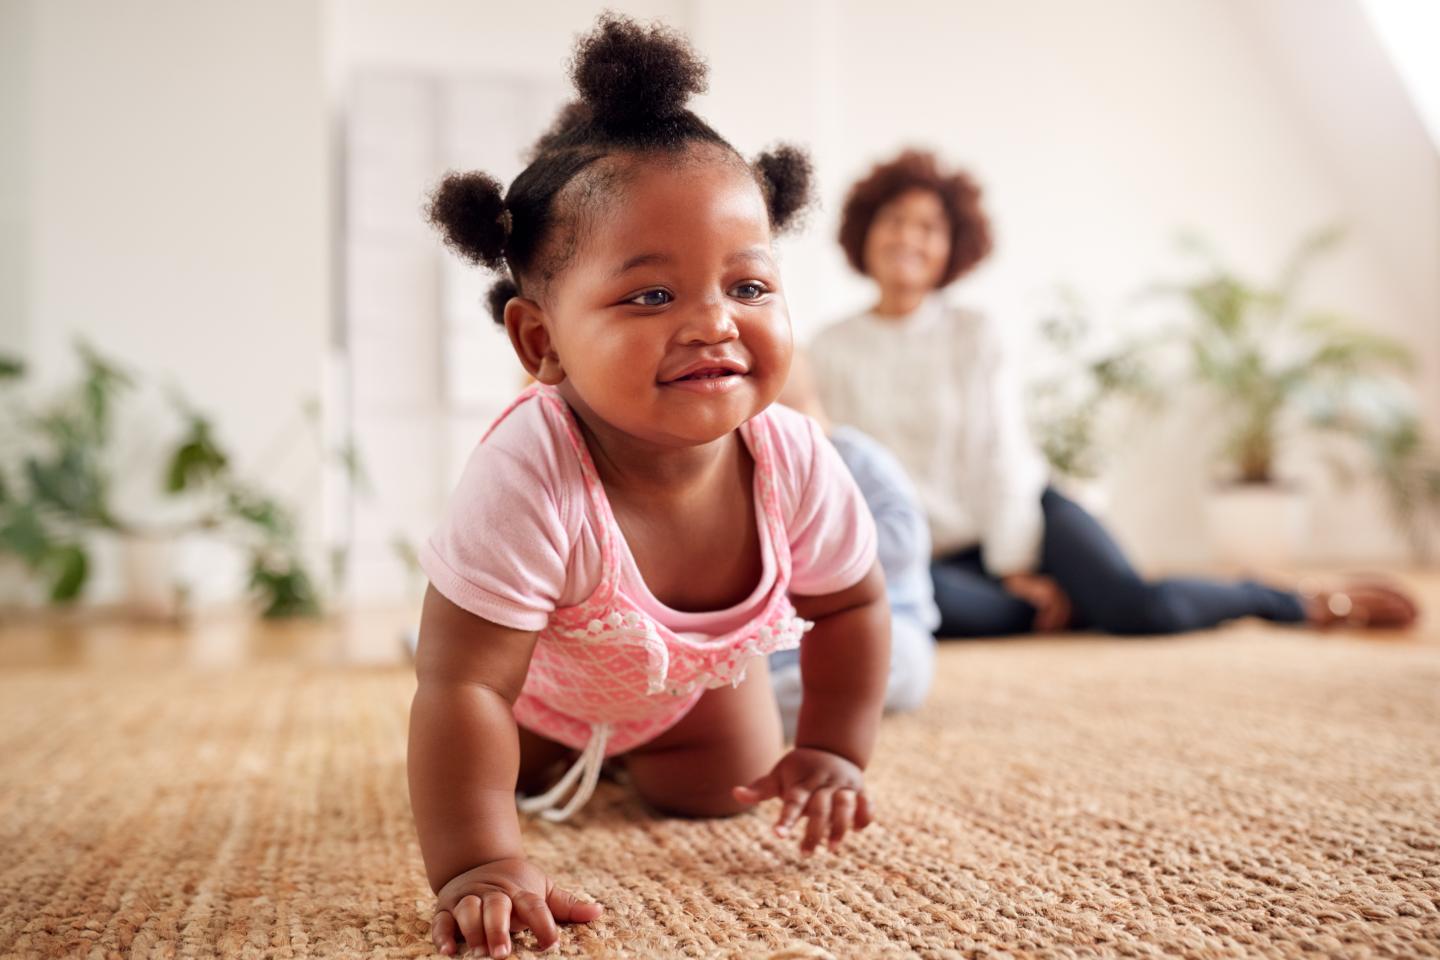 A baby crawling across the carpet with her mom watching in the background